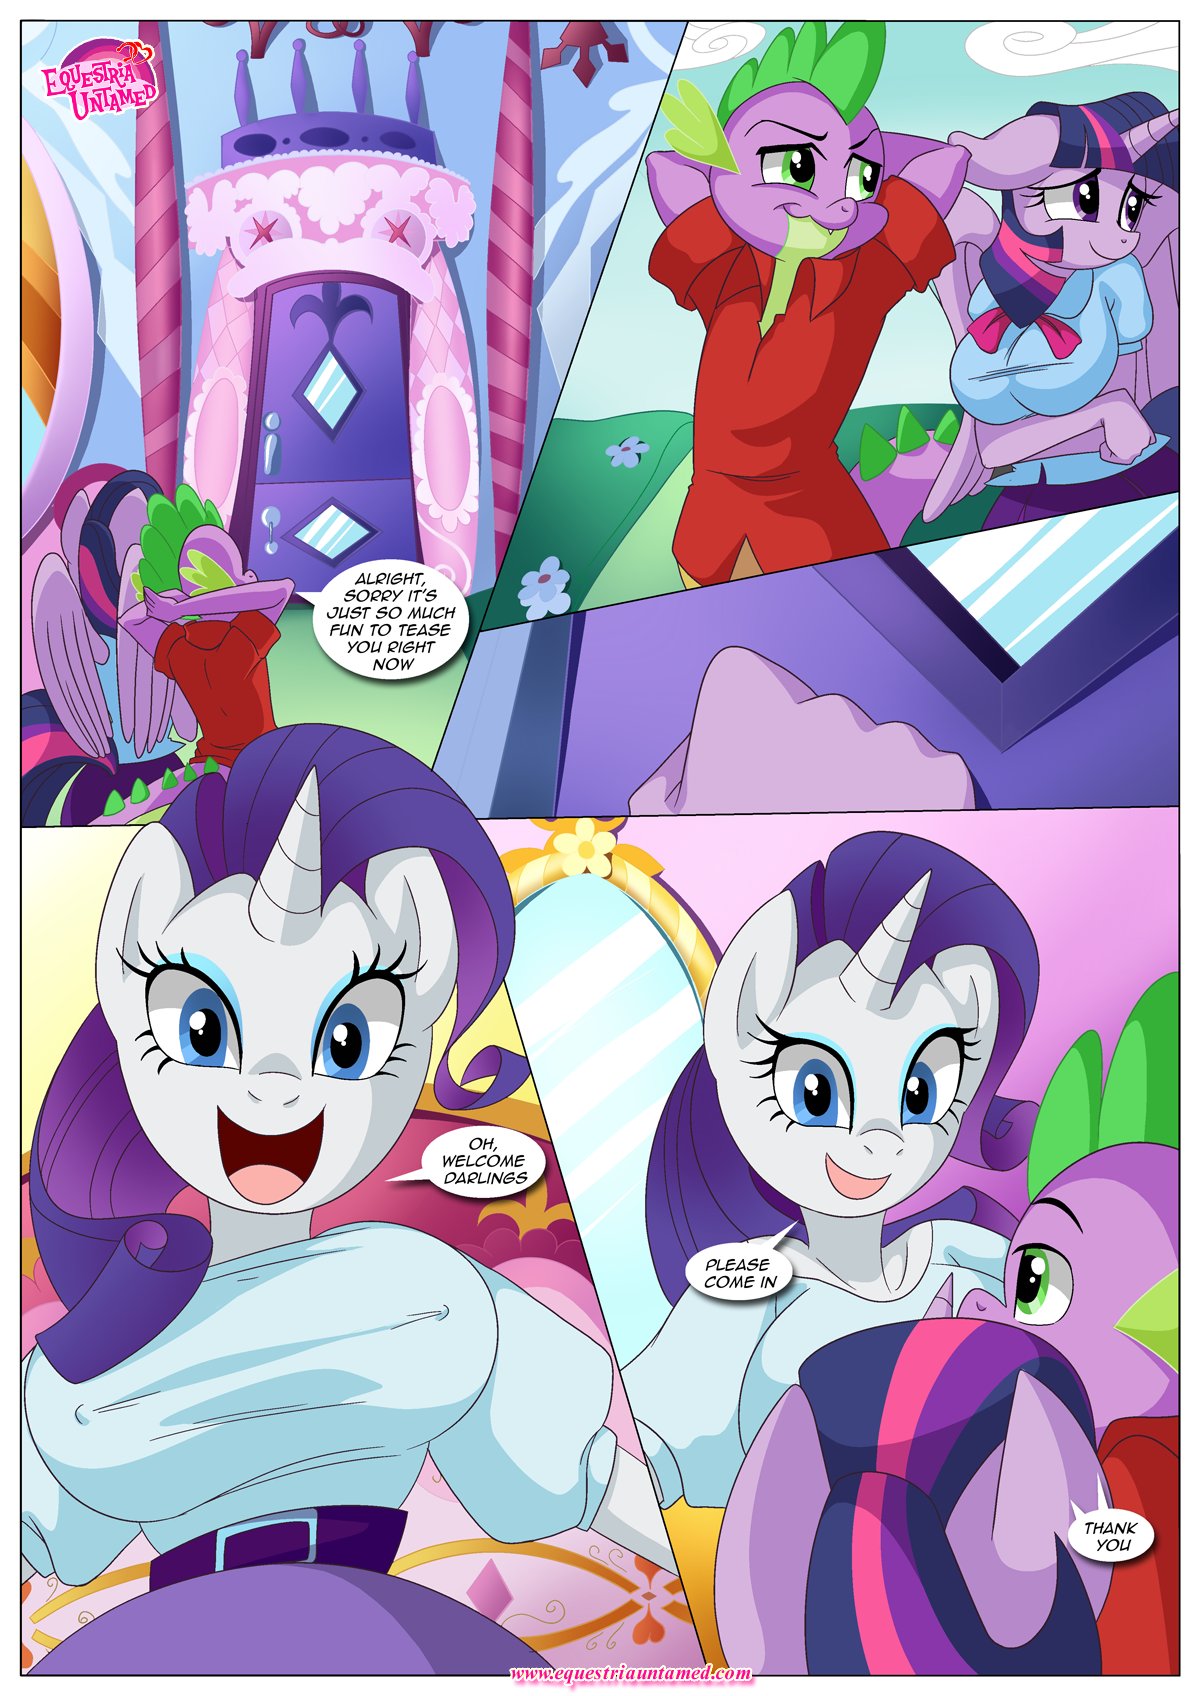 bbmbbf comic equestria_untamed friendship_is_magic furry how_to_discipline_your_dragon my_little_pony palcomix rarity rarity_(mlp) spike spike_(mlp) text twilight_sparkle twilight_sparkle_(mlp)